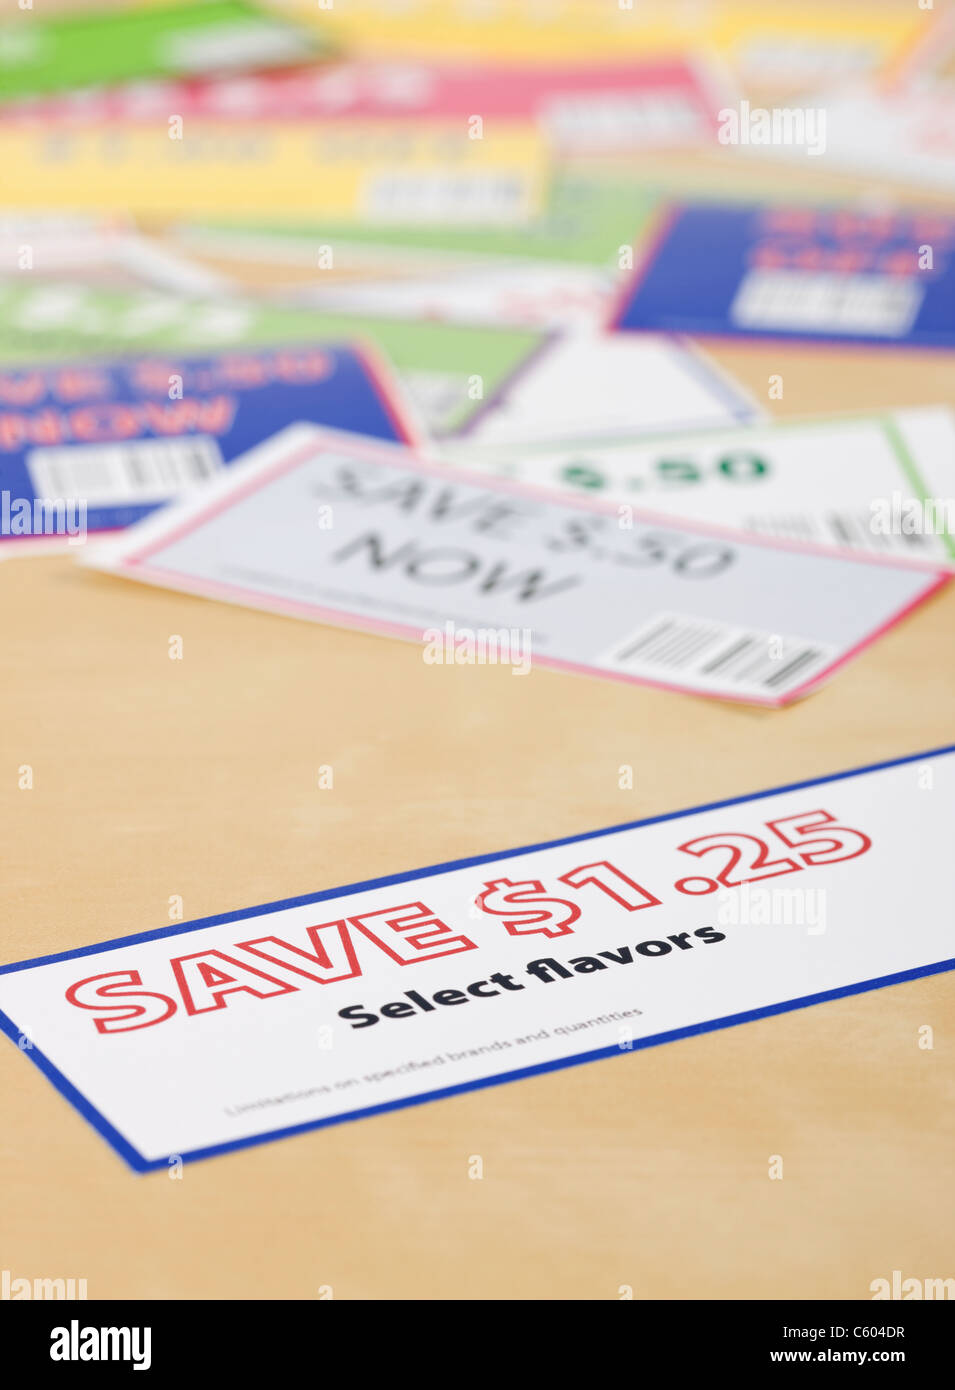 Close-up of coupons on table Stock Photo